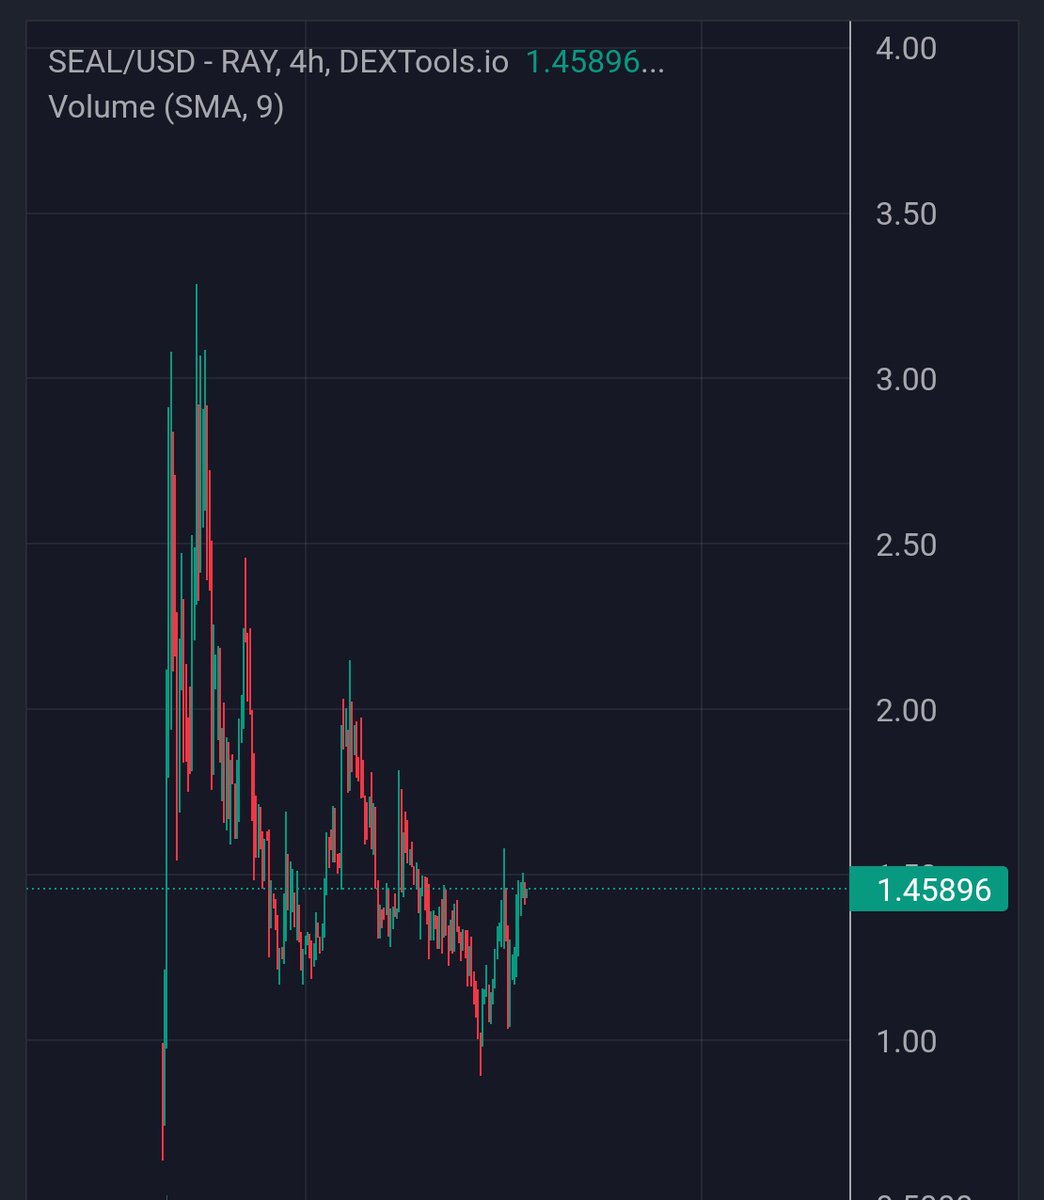 We are making waves on the #Solana chain. #Seal the deal now. Already isted on CMC, CG, Coinstore, BitMart and #MEXC listing coming next on May 20! 🌊🦭 

$SEAL CHART:
dextools.io/app/en/solana/…